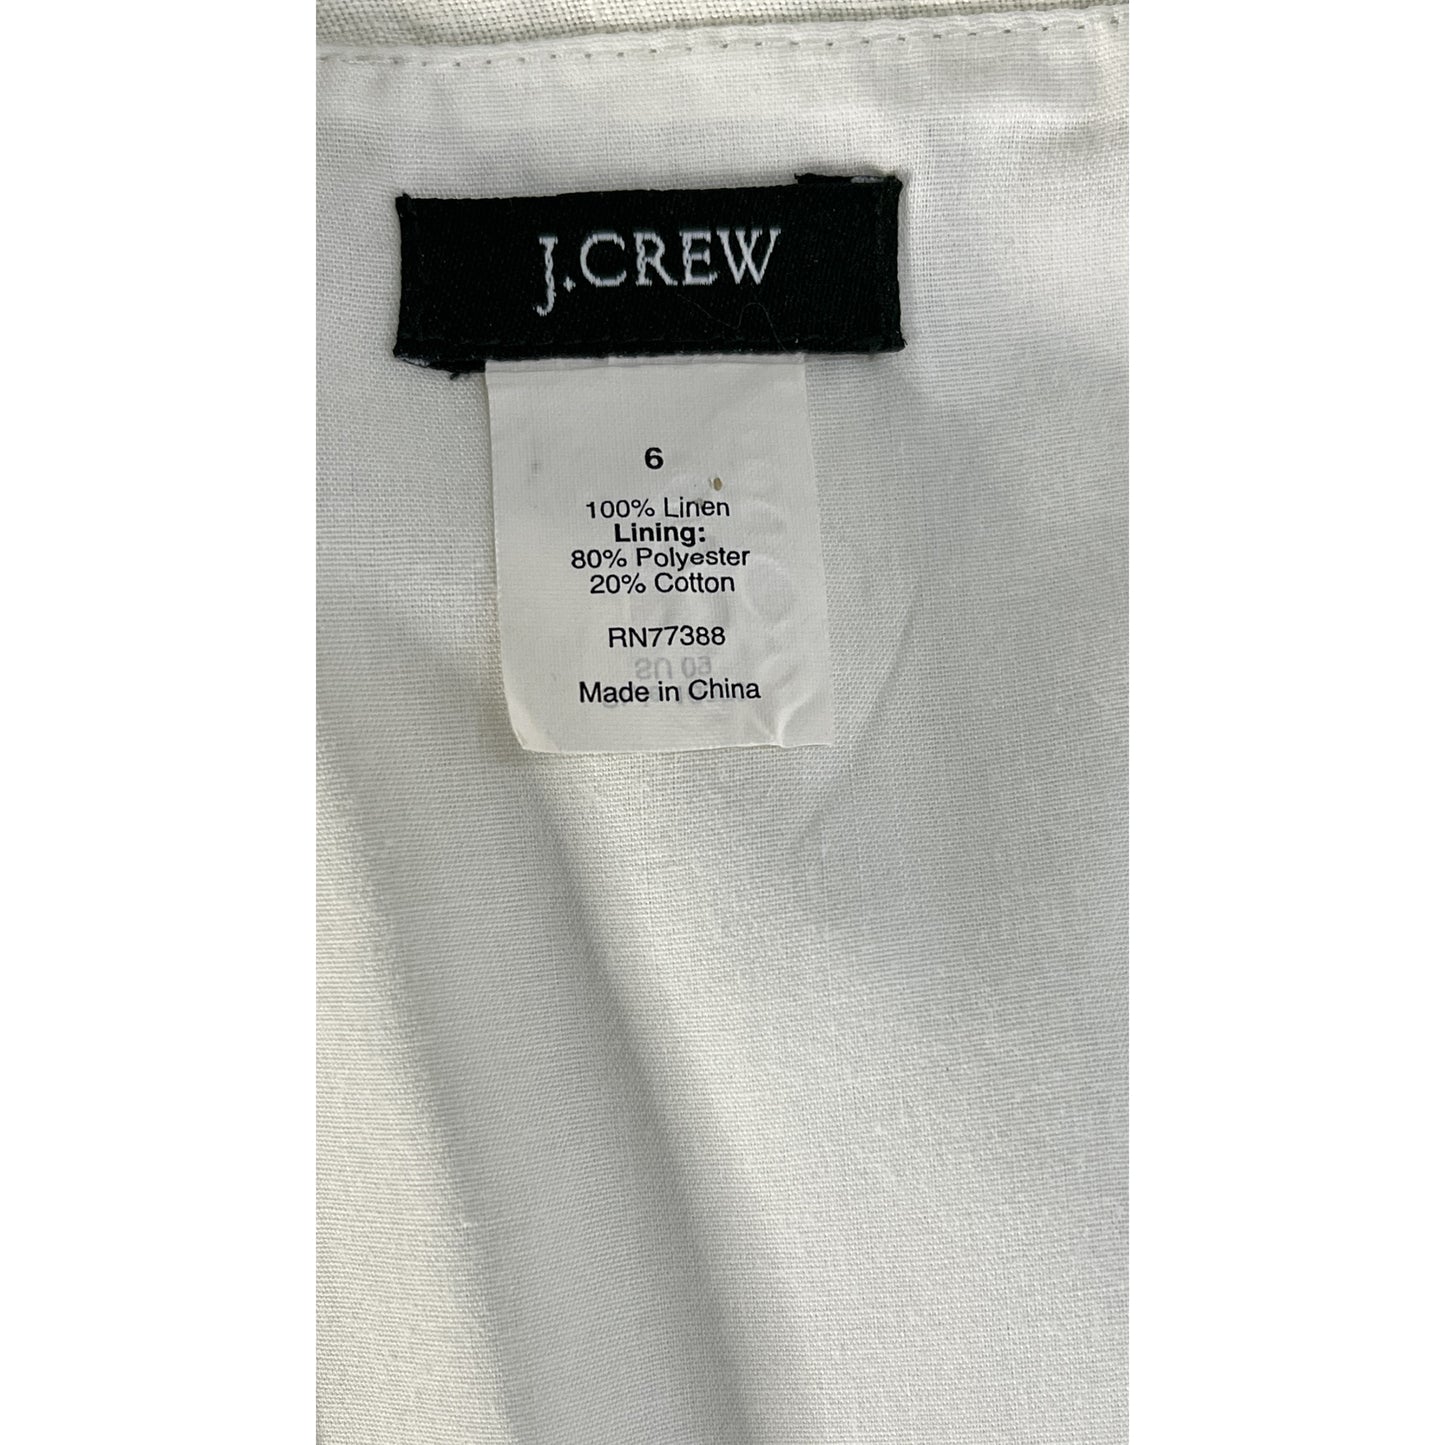 J. Crew Pencil Skirt Ombre White, Yellow Size 6 SKU 000218-12